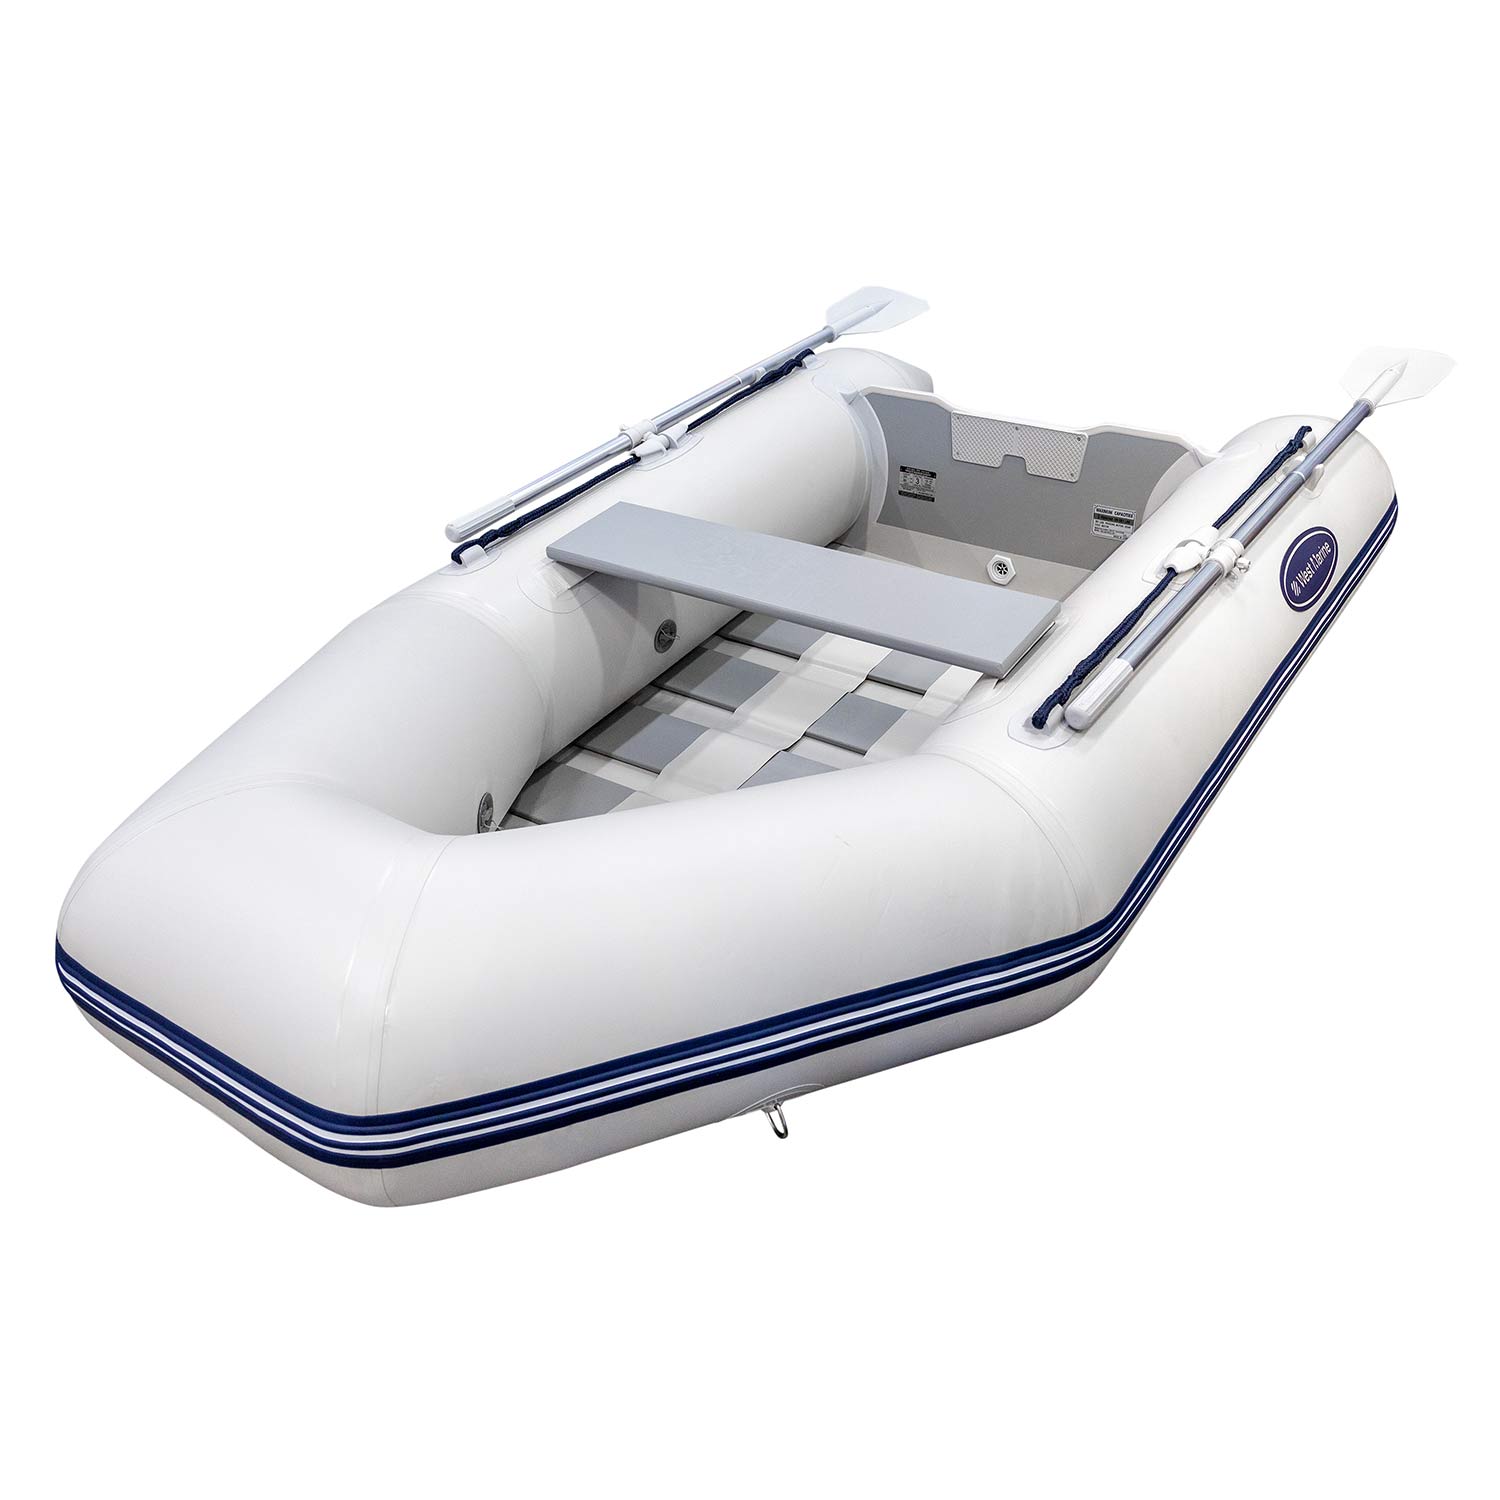 WEST MARINE RU-250 Roll-Up Inflatable Dinghy